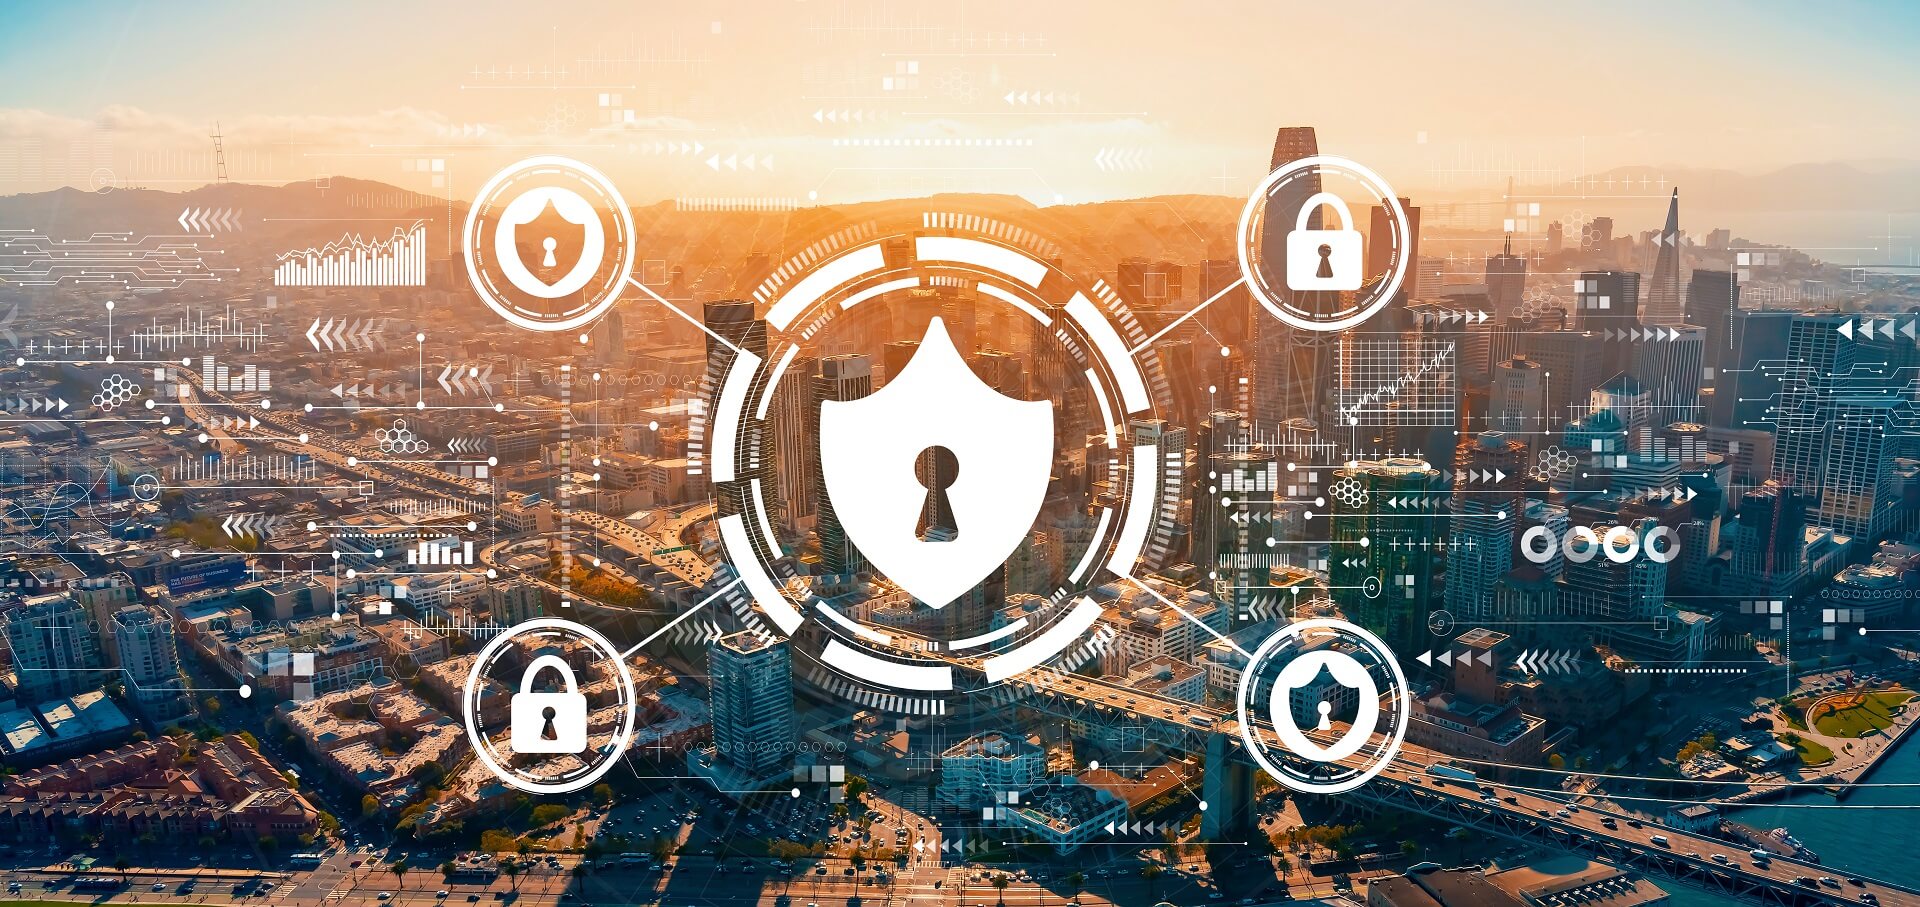 Cyber security theme with downtown San Francisco